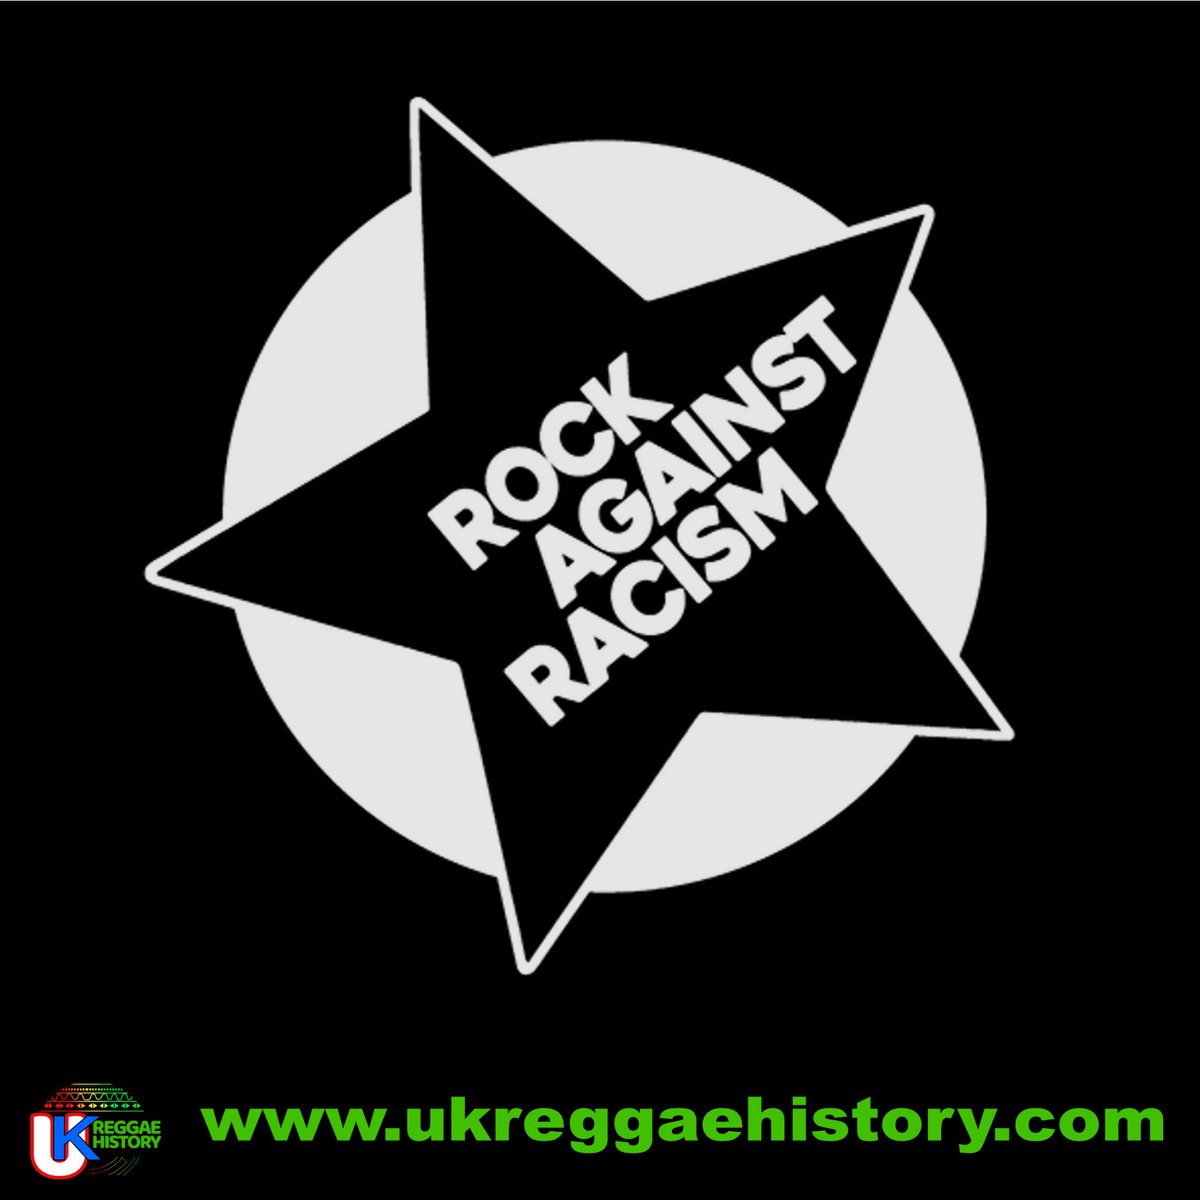 #CheckOut the new #RockAgainstRacism #RAR page. #RAR brought #Punk and #Reggae bands together as a weapon against the far-right. In 1978, race relations in Britain were in crisis. #RAR was a campaign aimed at halting the tide of hatred with music #racism ukreggaehistory.com/rock-against-r…